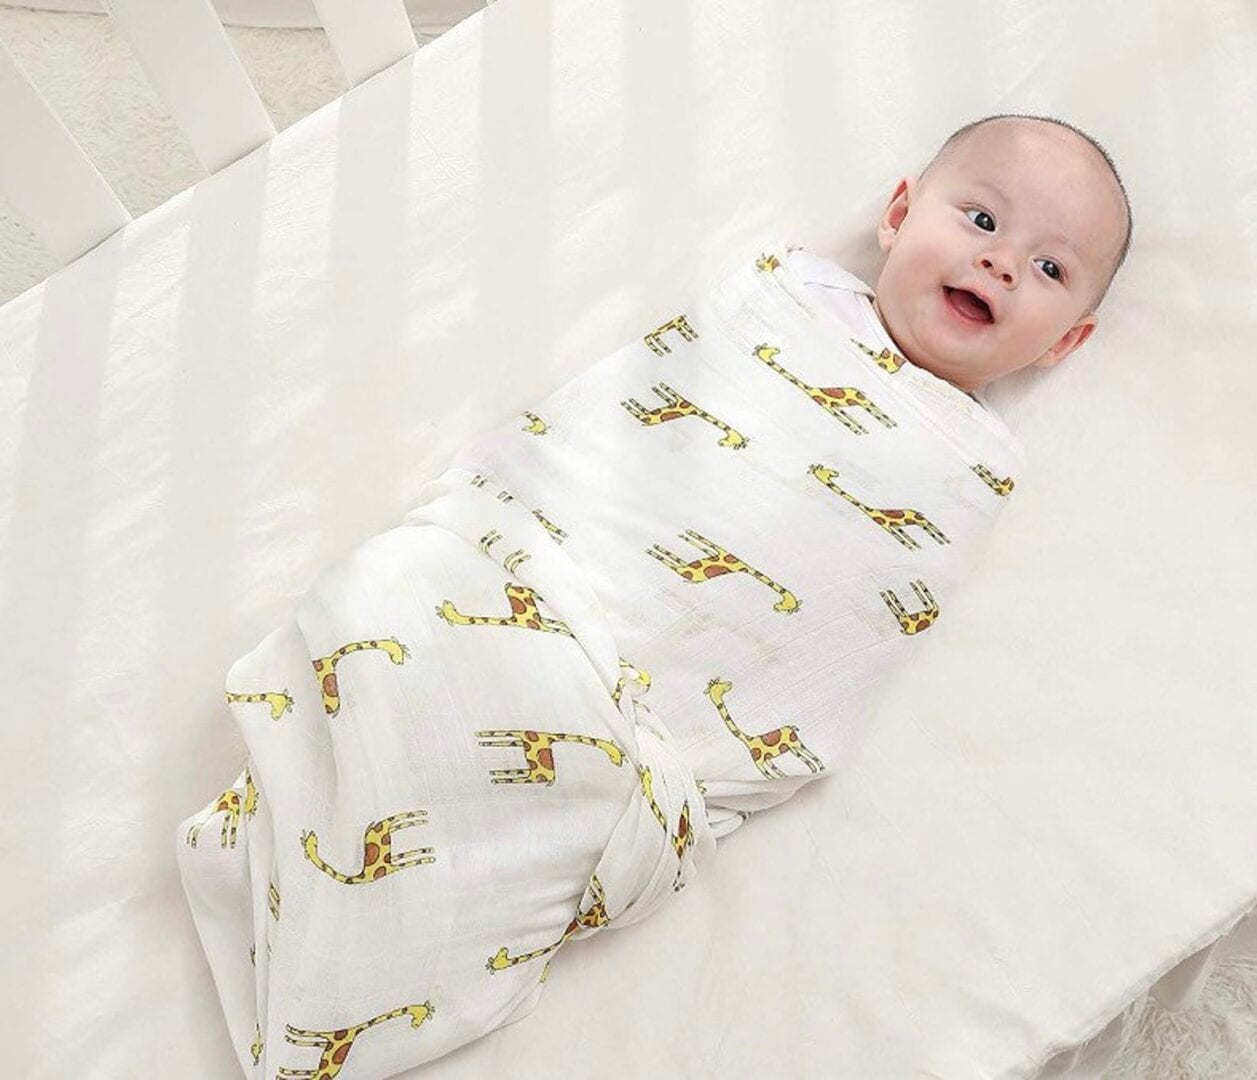 Baby wrapped in a white swaddle blanket with cute giraffe pattern